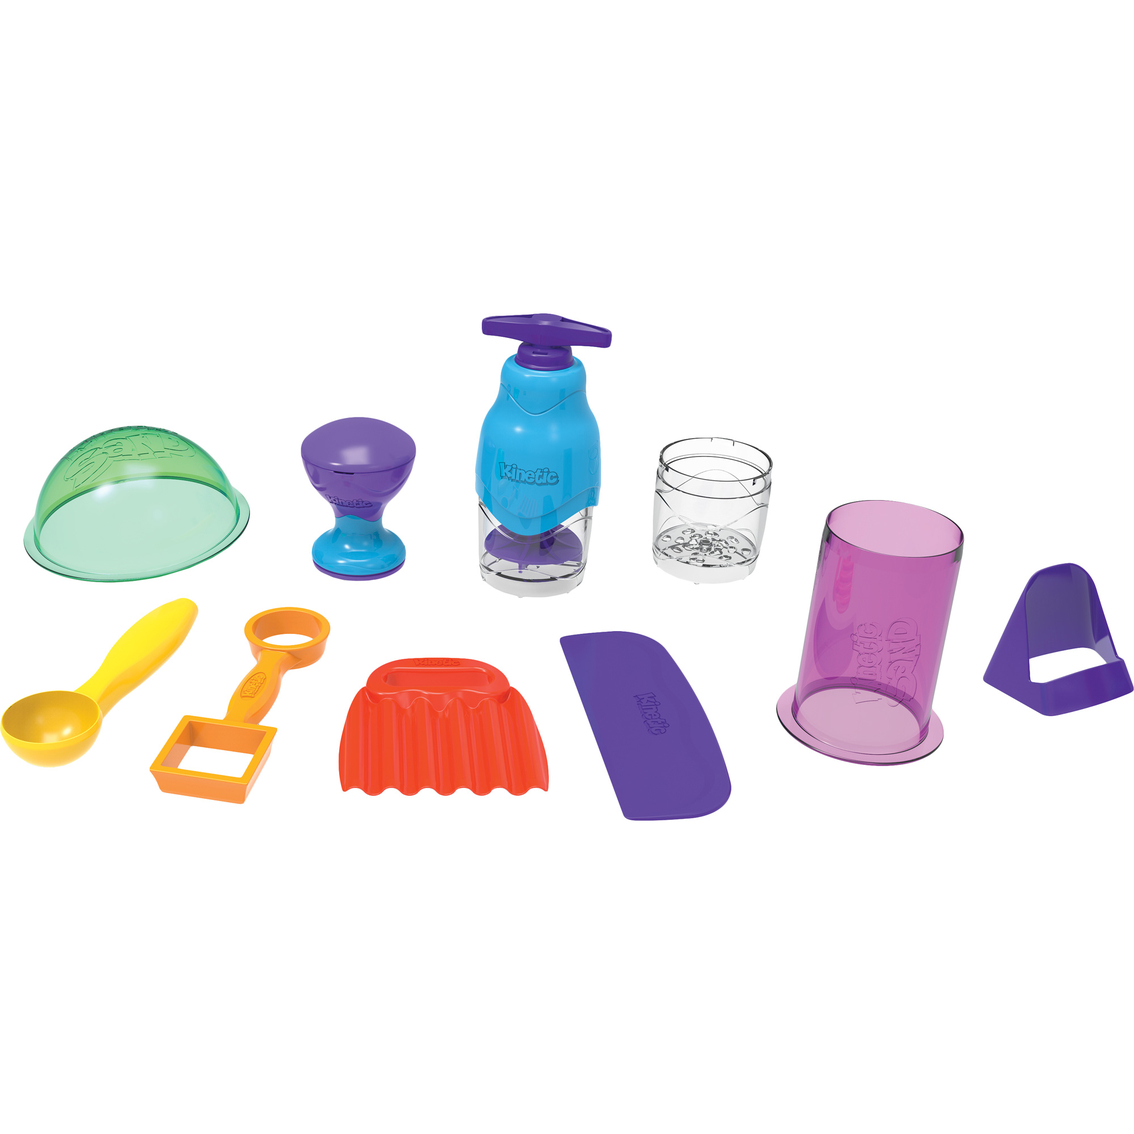 Details about   Kinetic Sand for Kids Aged 3 an Sandisfying Set with 2lbs of Sand and 10 Tools 